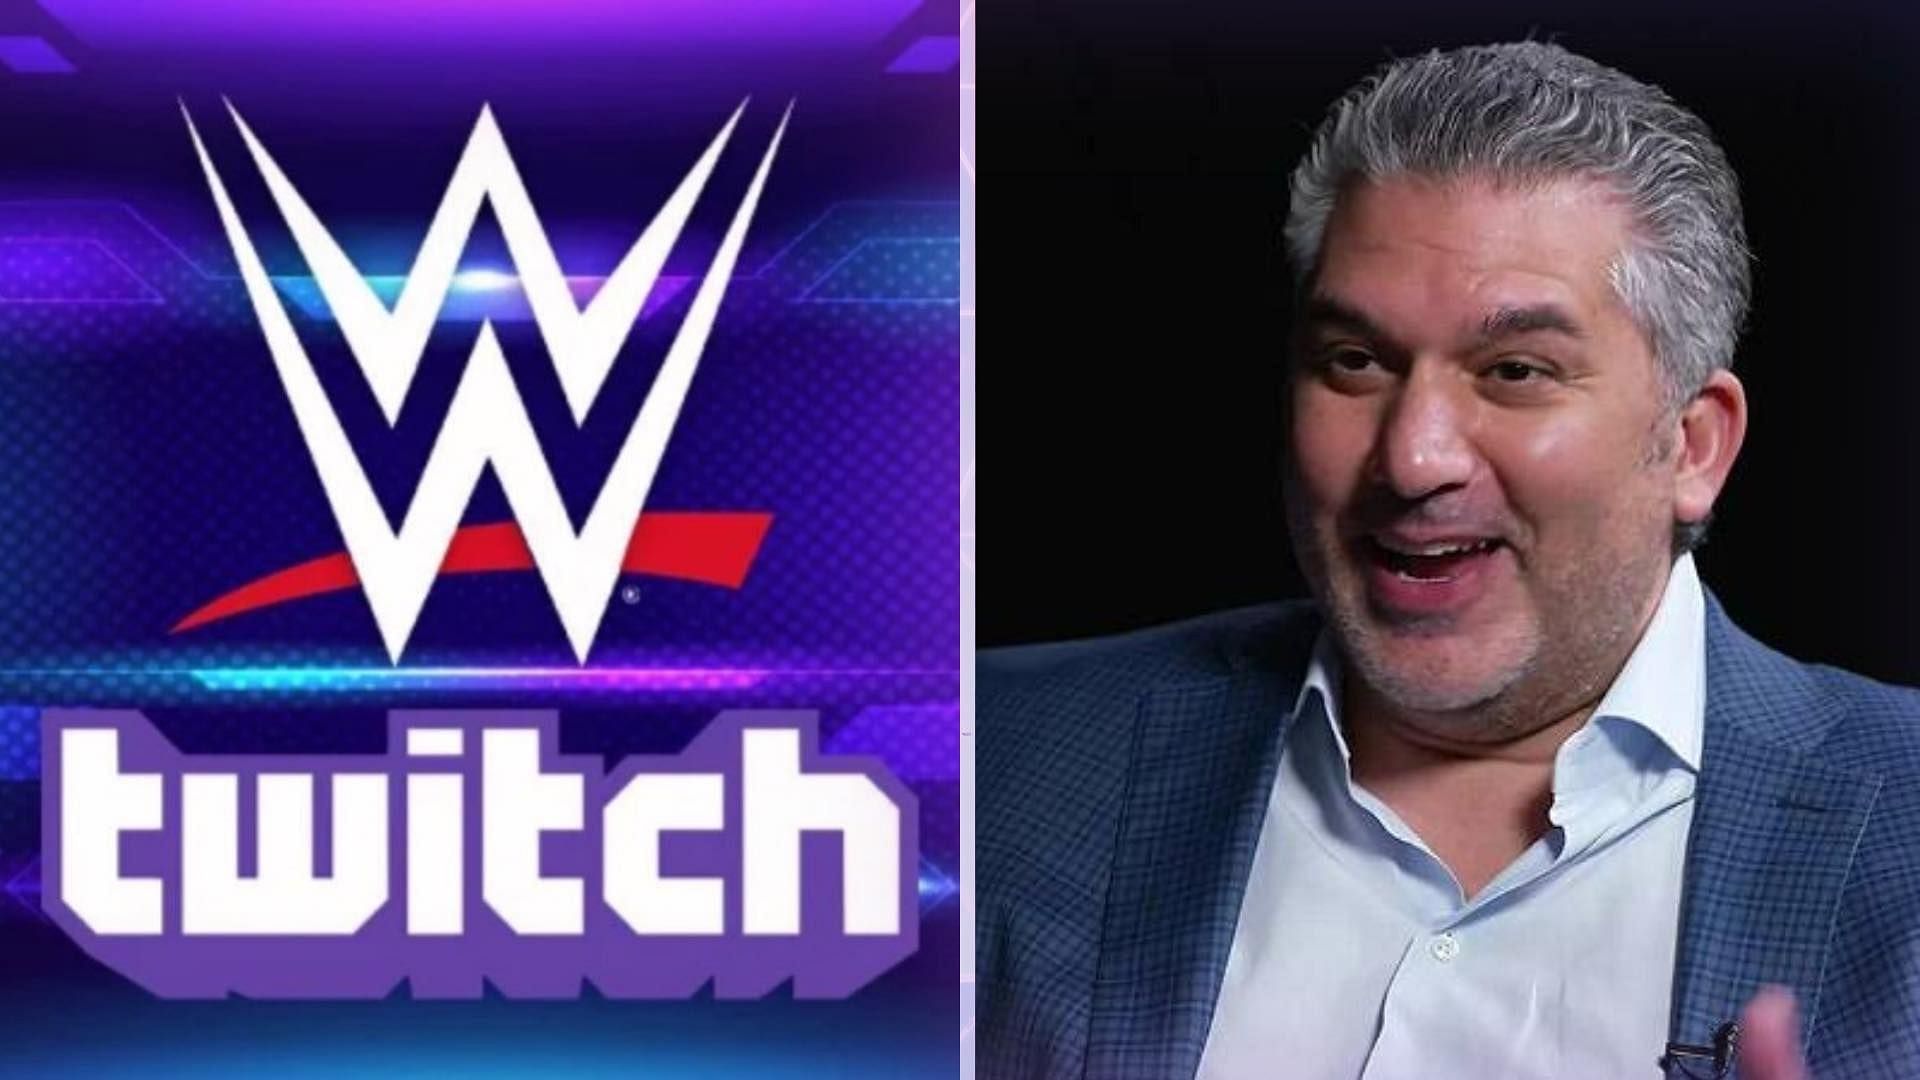 WWE recently made deal with Twitch.